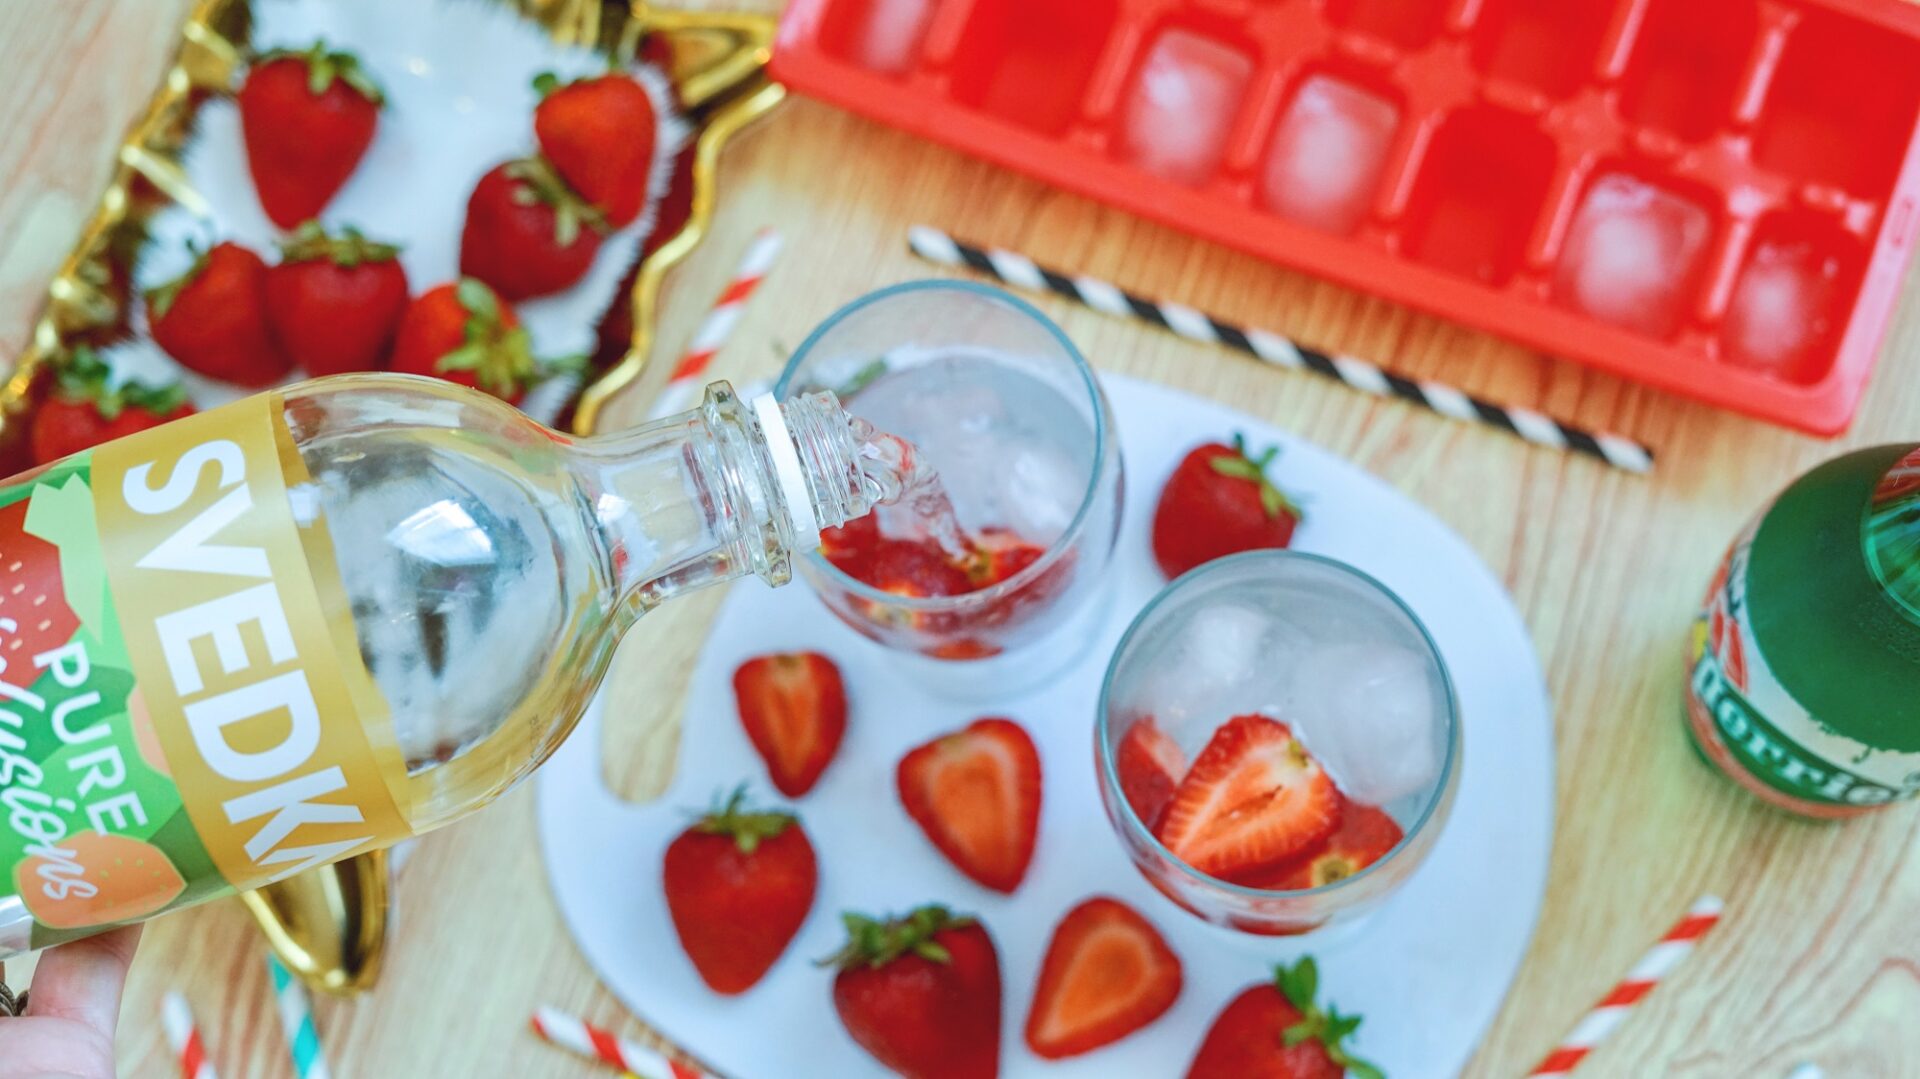 Pouring vodka into a glass of strawberries and ice.